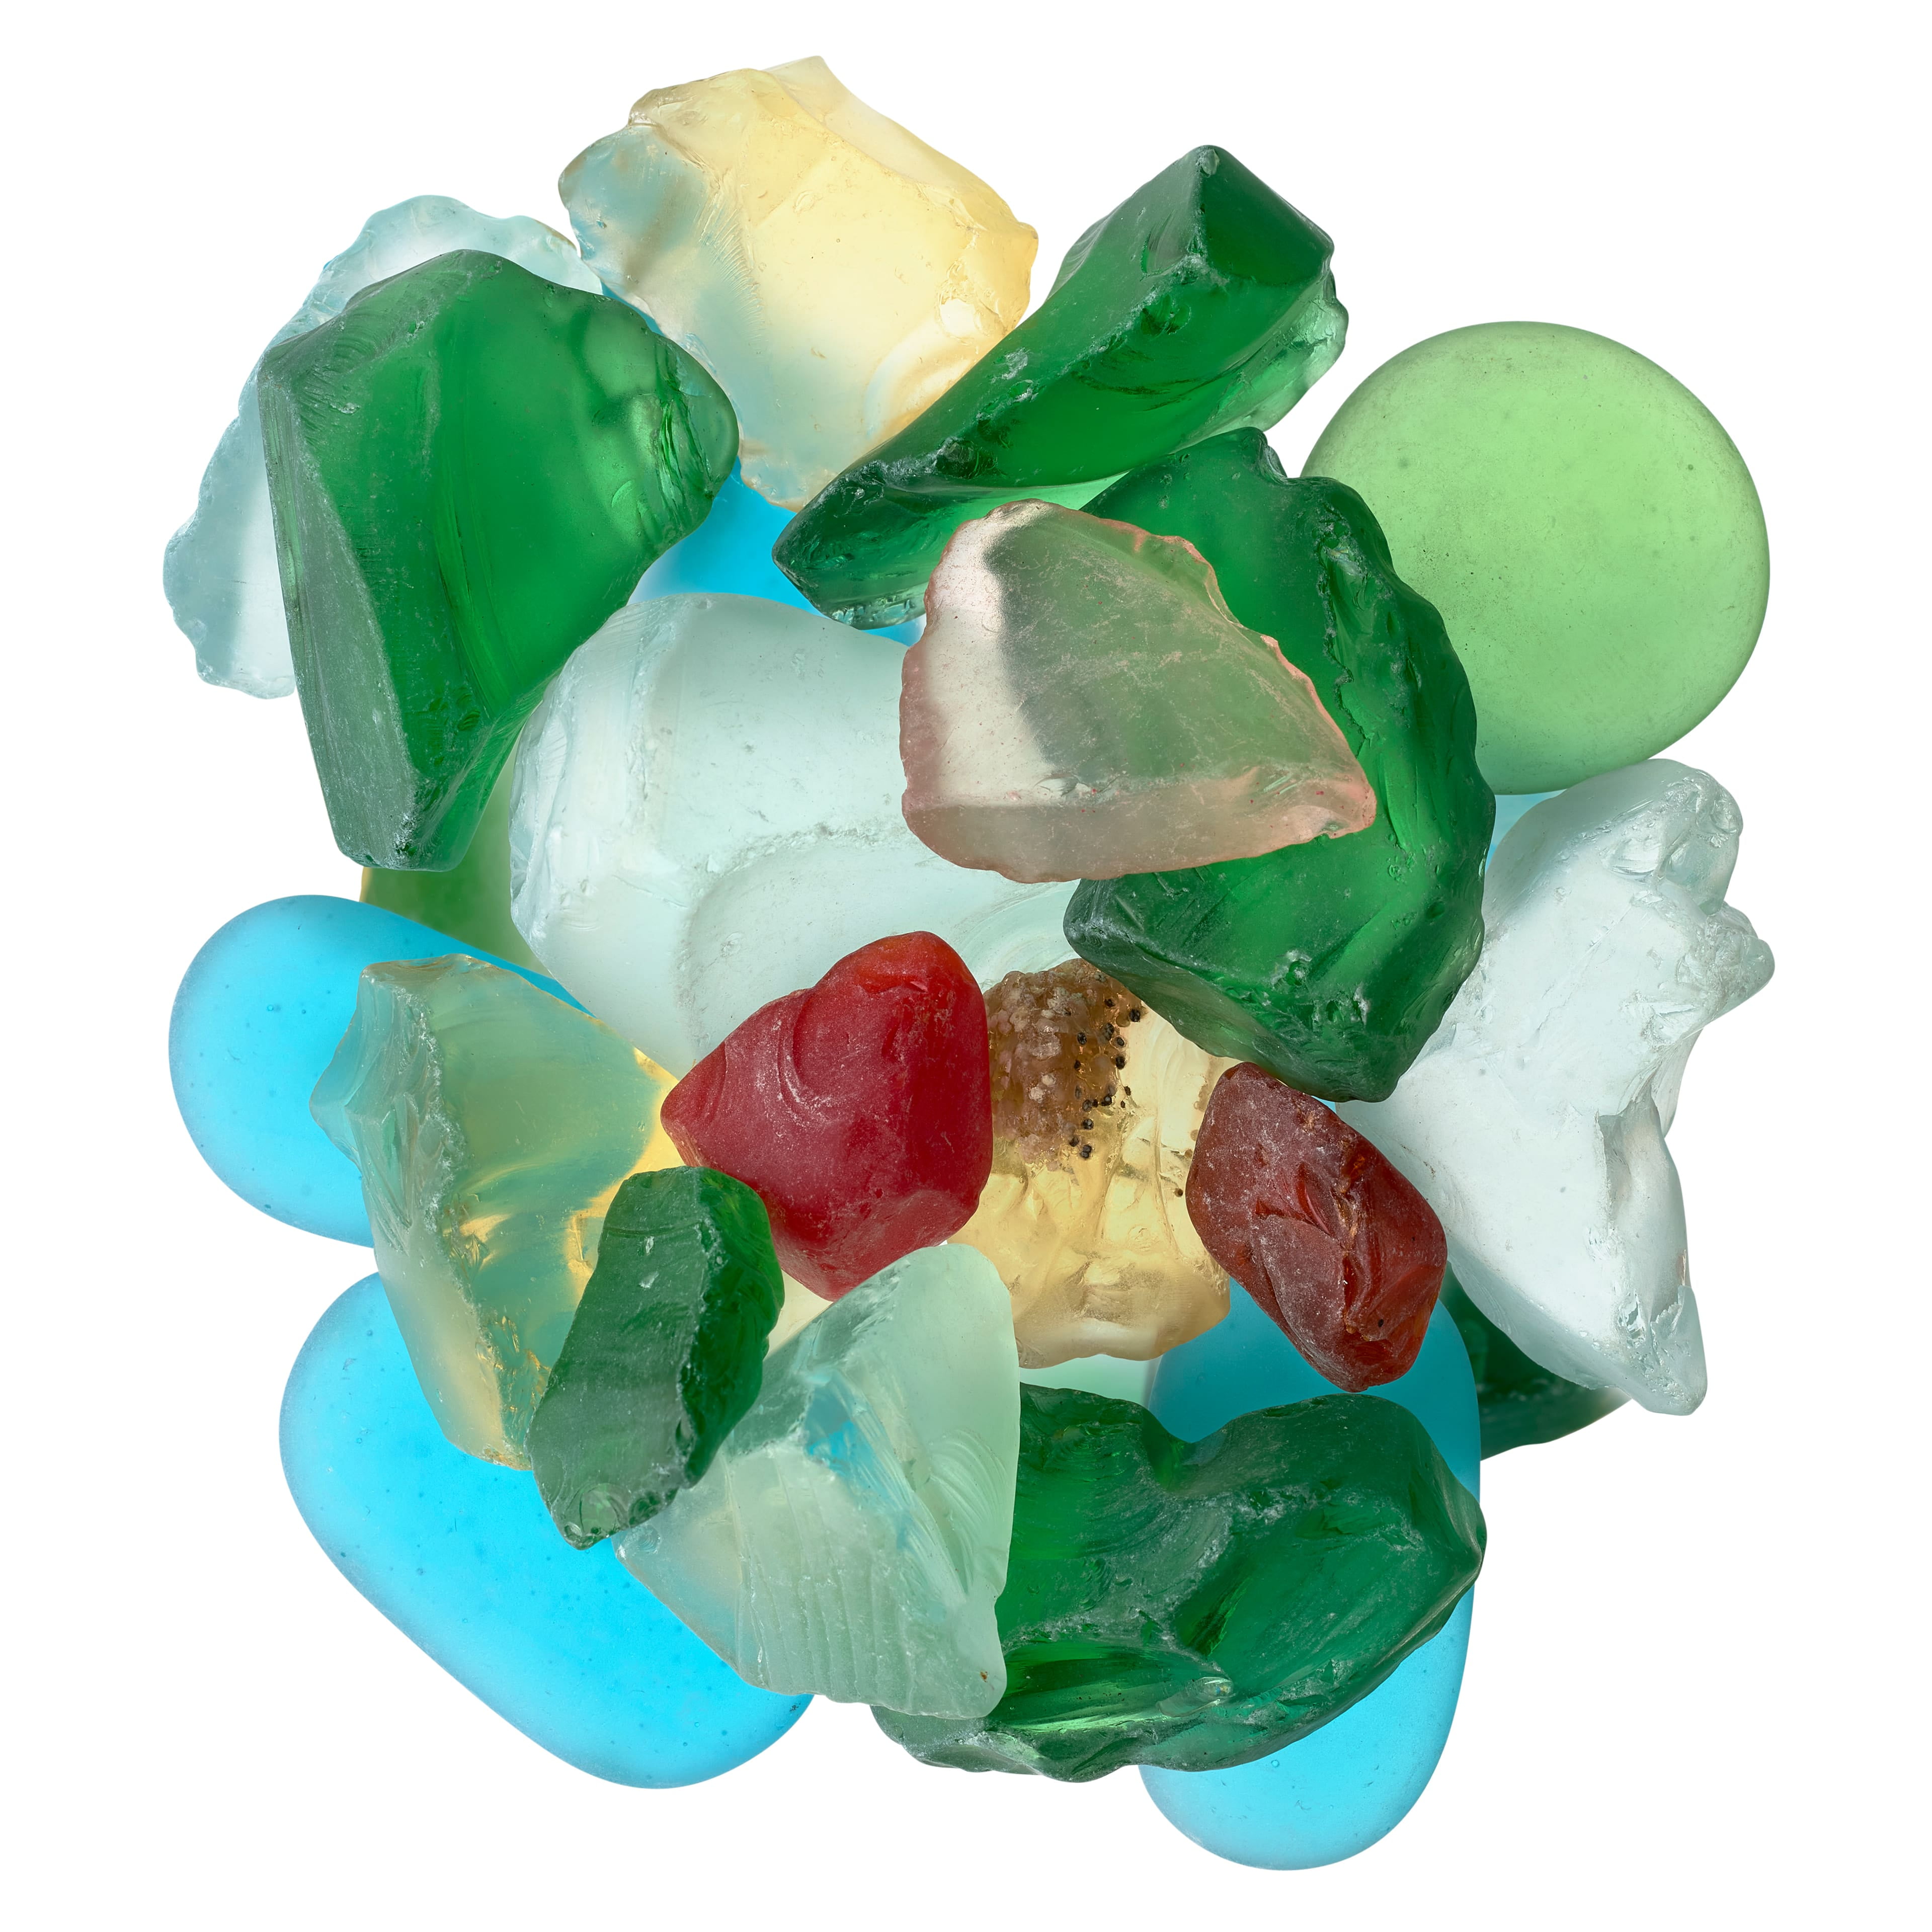 18 Pack: Turquoise Crushed Glass by Ashland® 